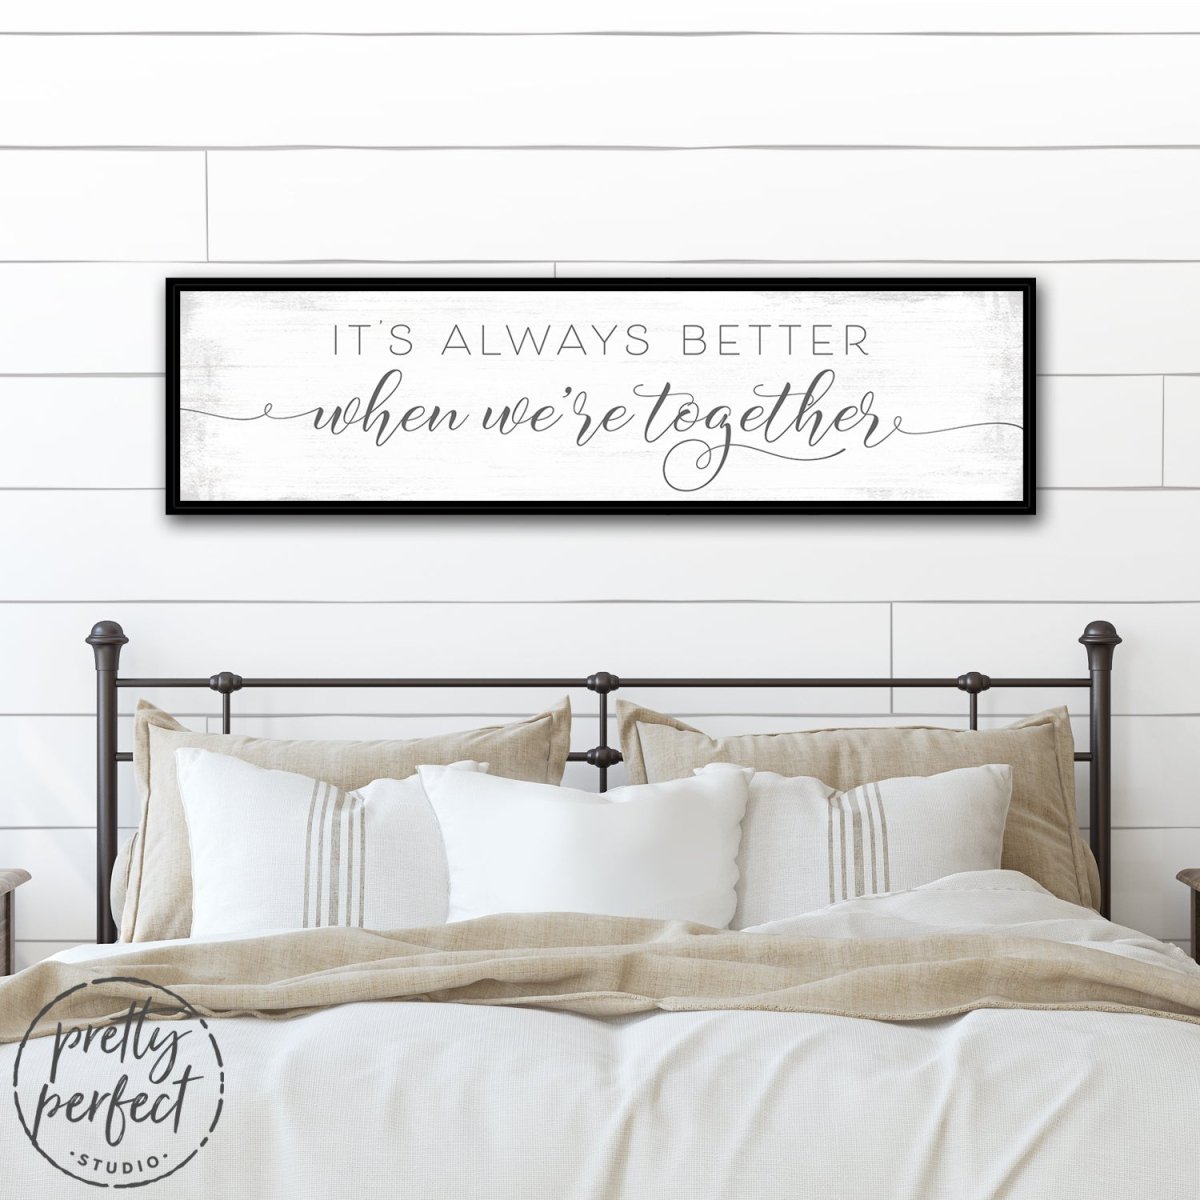 It's Always Better When We're Together Sign Over Bed in Master Bedroom - Pretty Perfect Studio